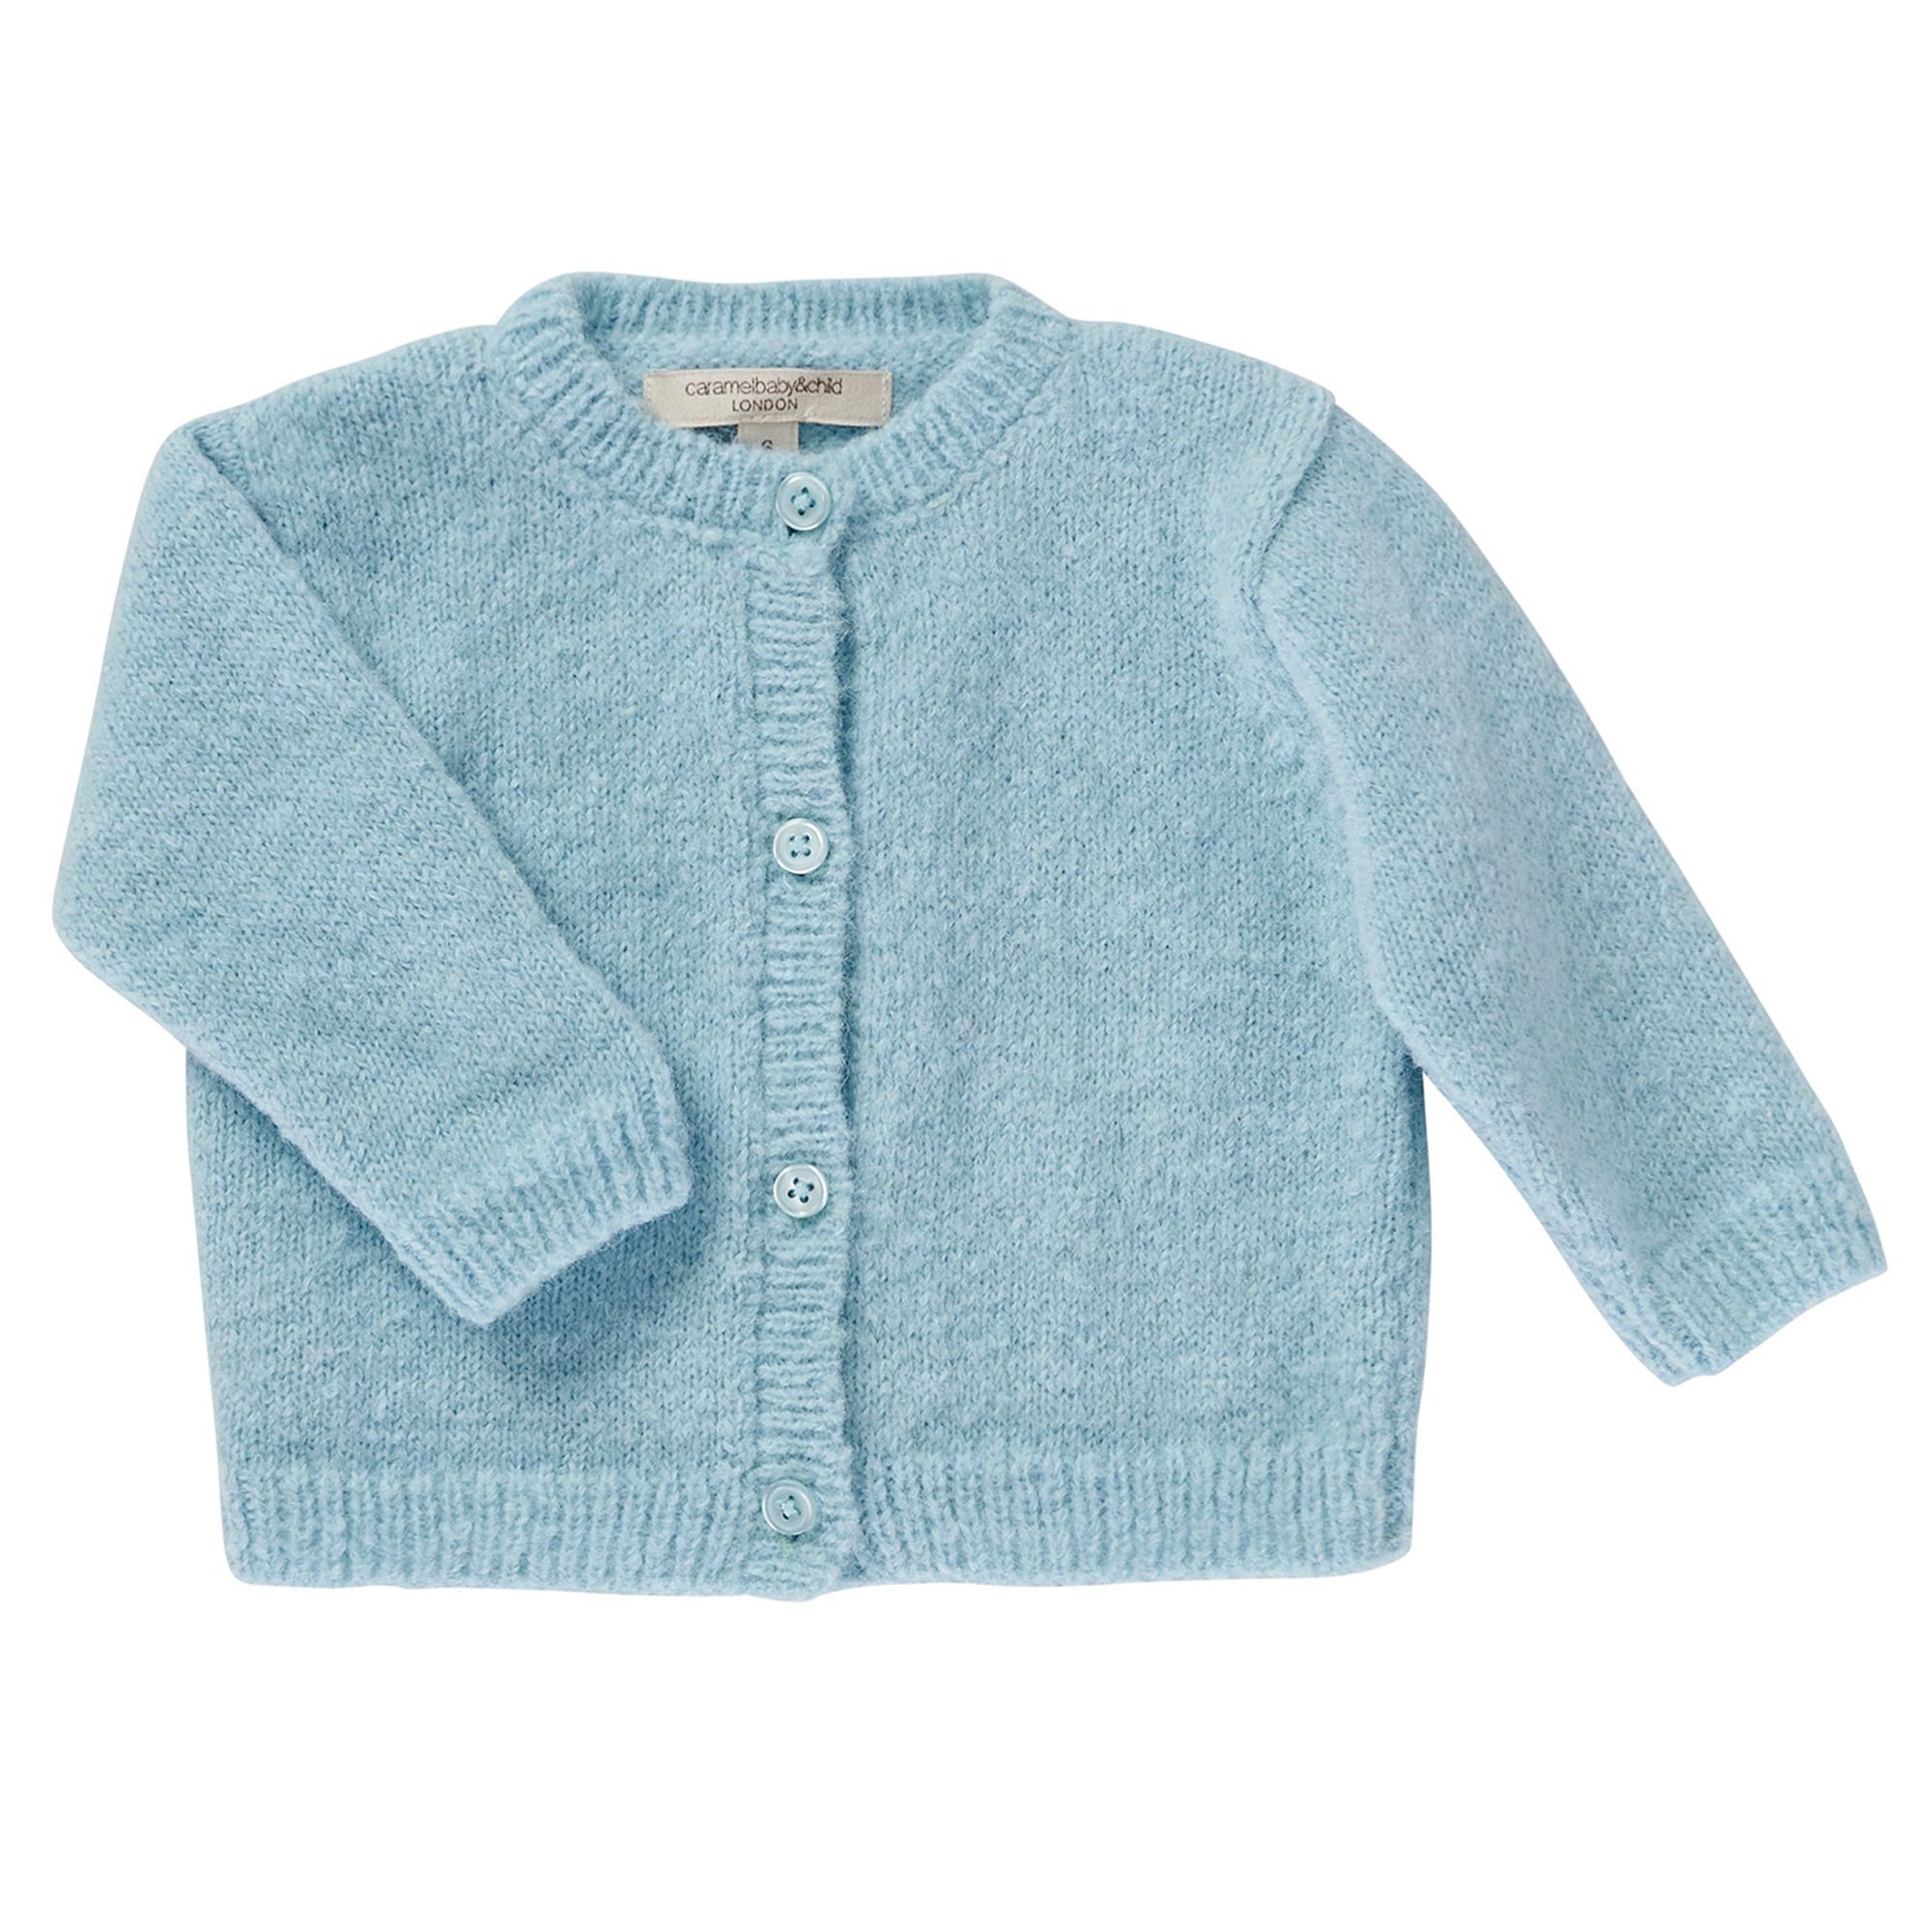 Baby Boys Ice Blue Knitted Cardigans - CÉMAROSE | Children's Fashion Store - 1